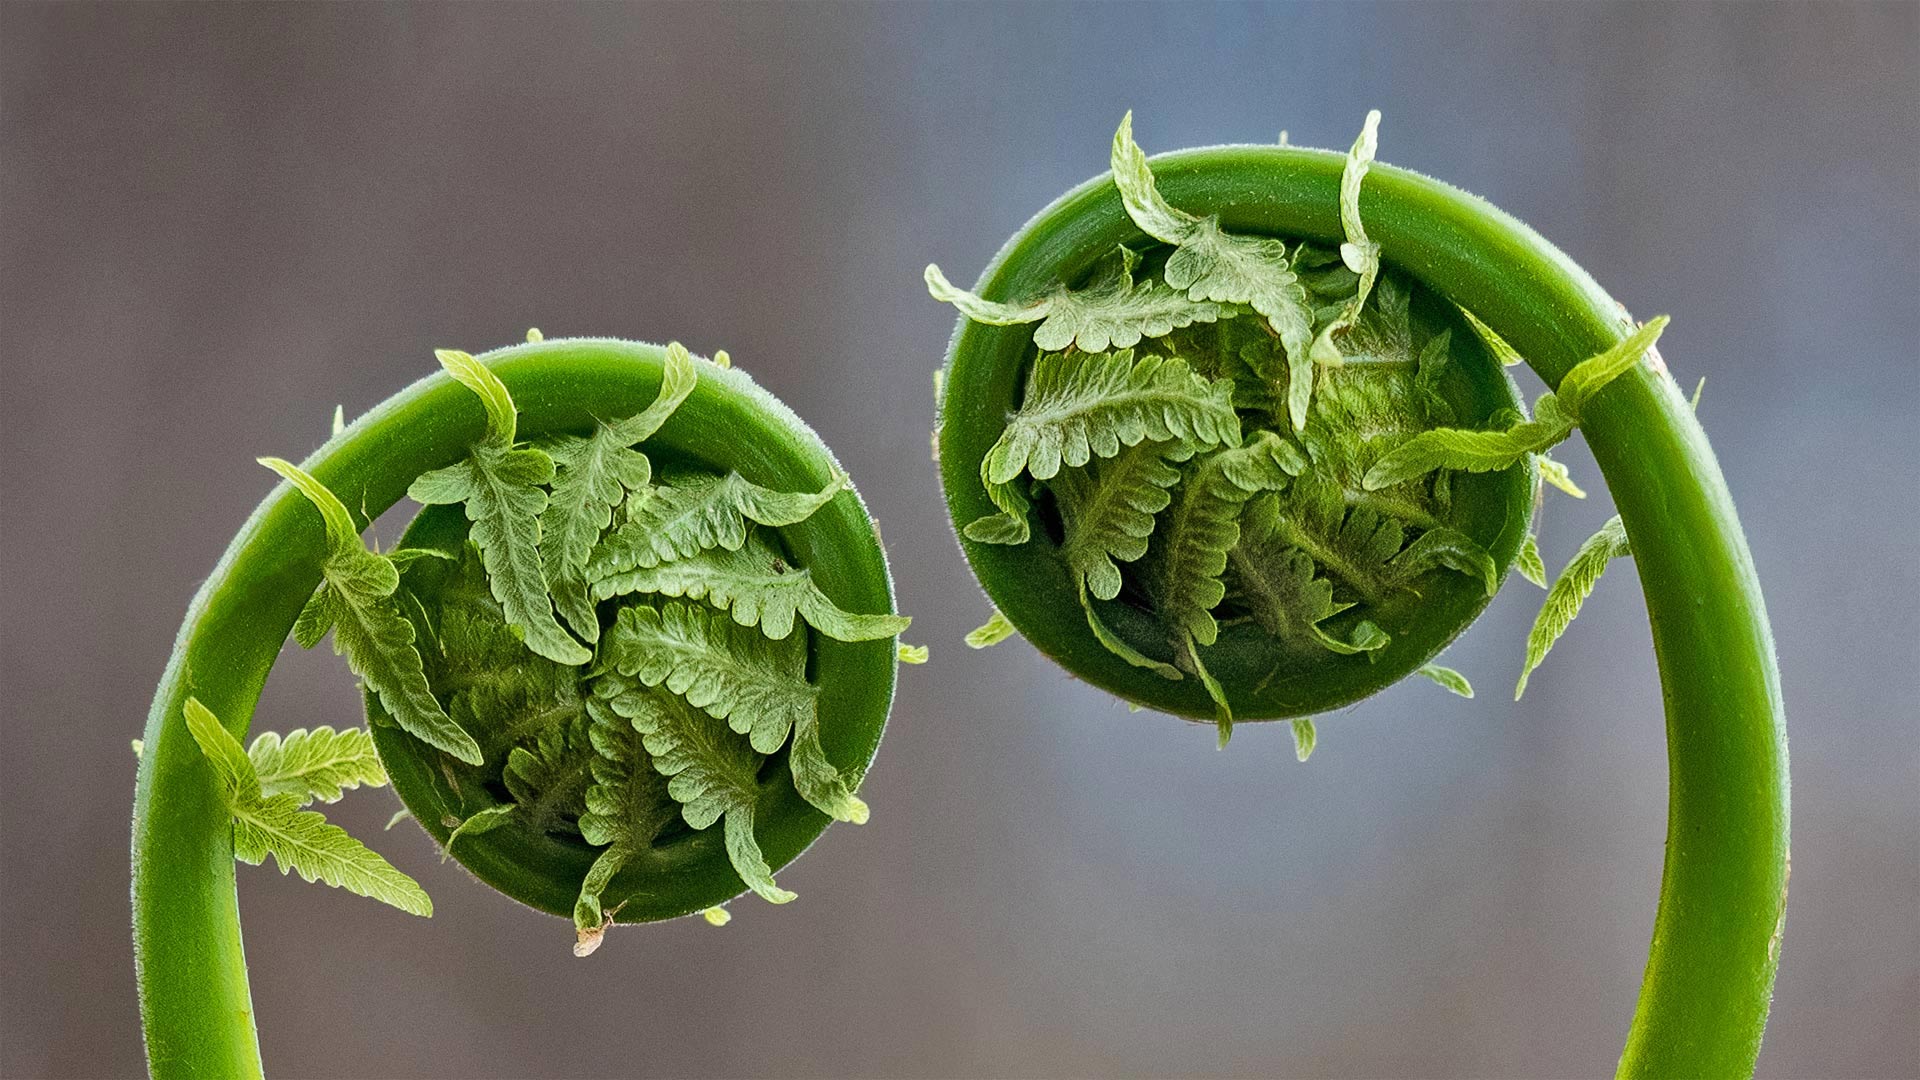 Fiddlehead fern fronds in Quebec, Canada - Marianna Armata/Getty Images)